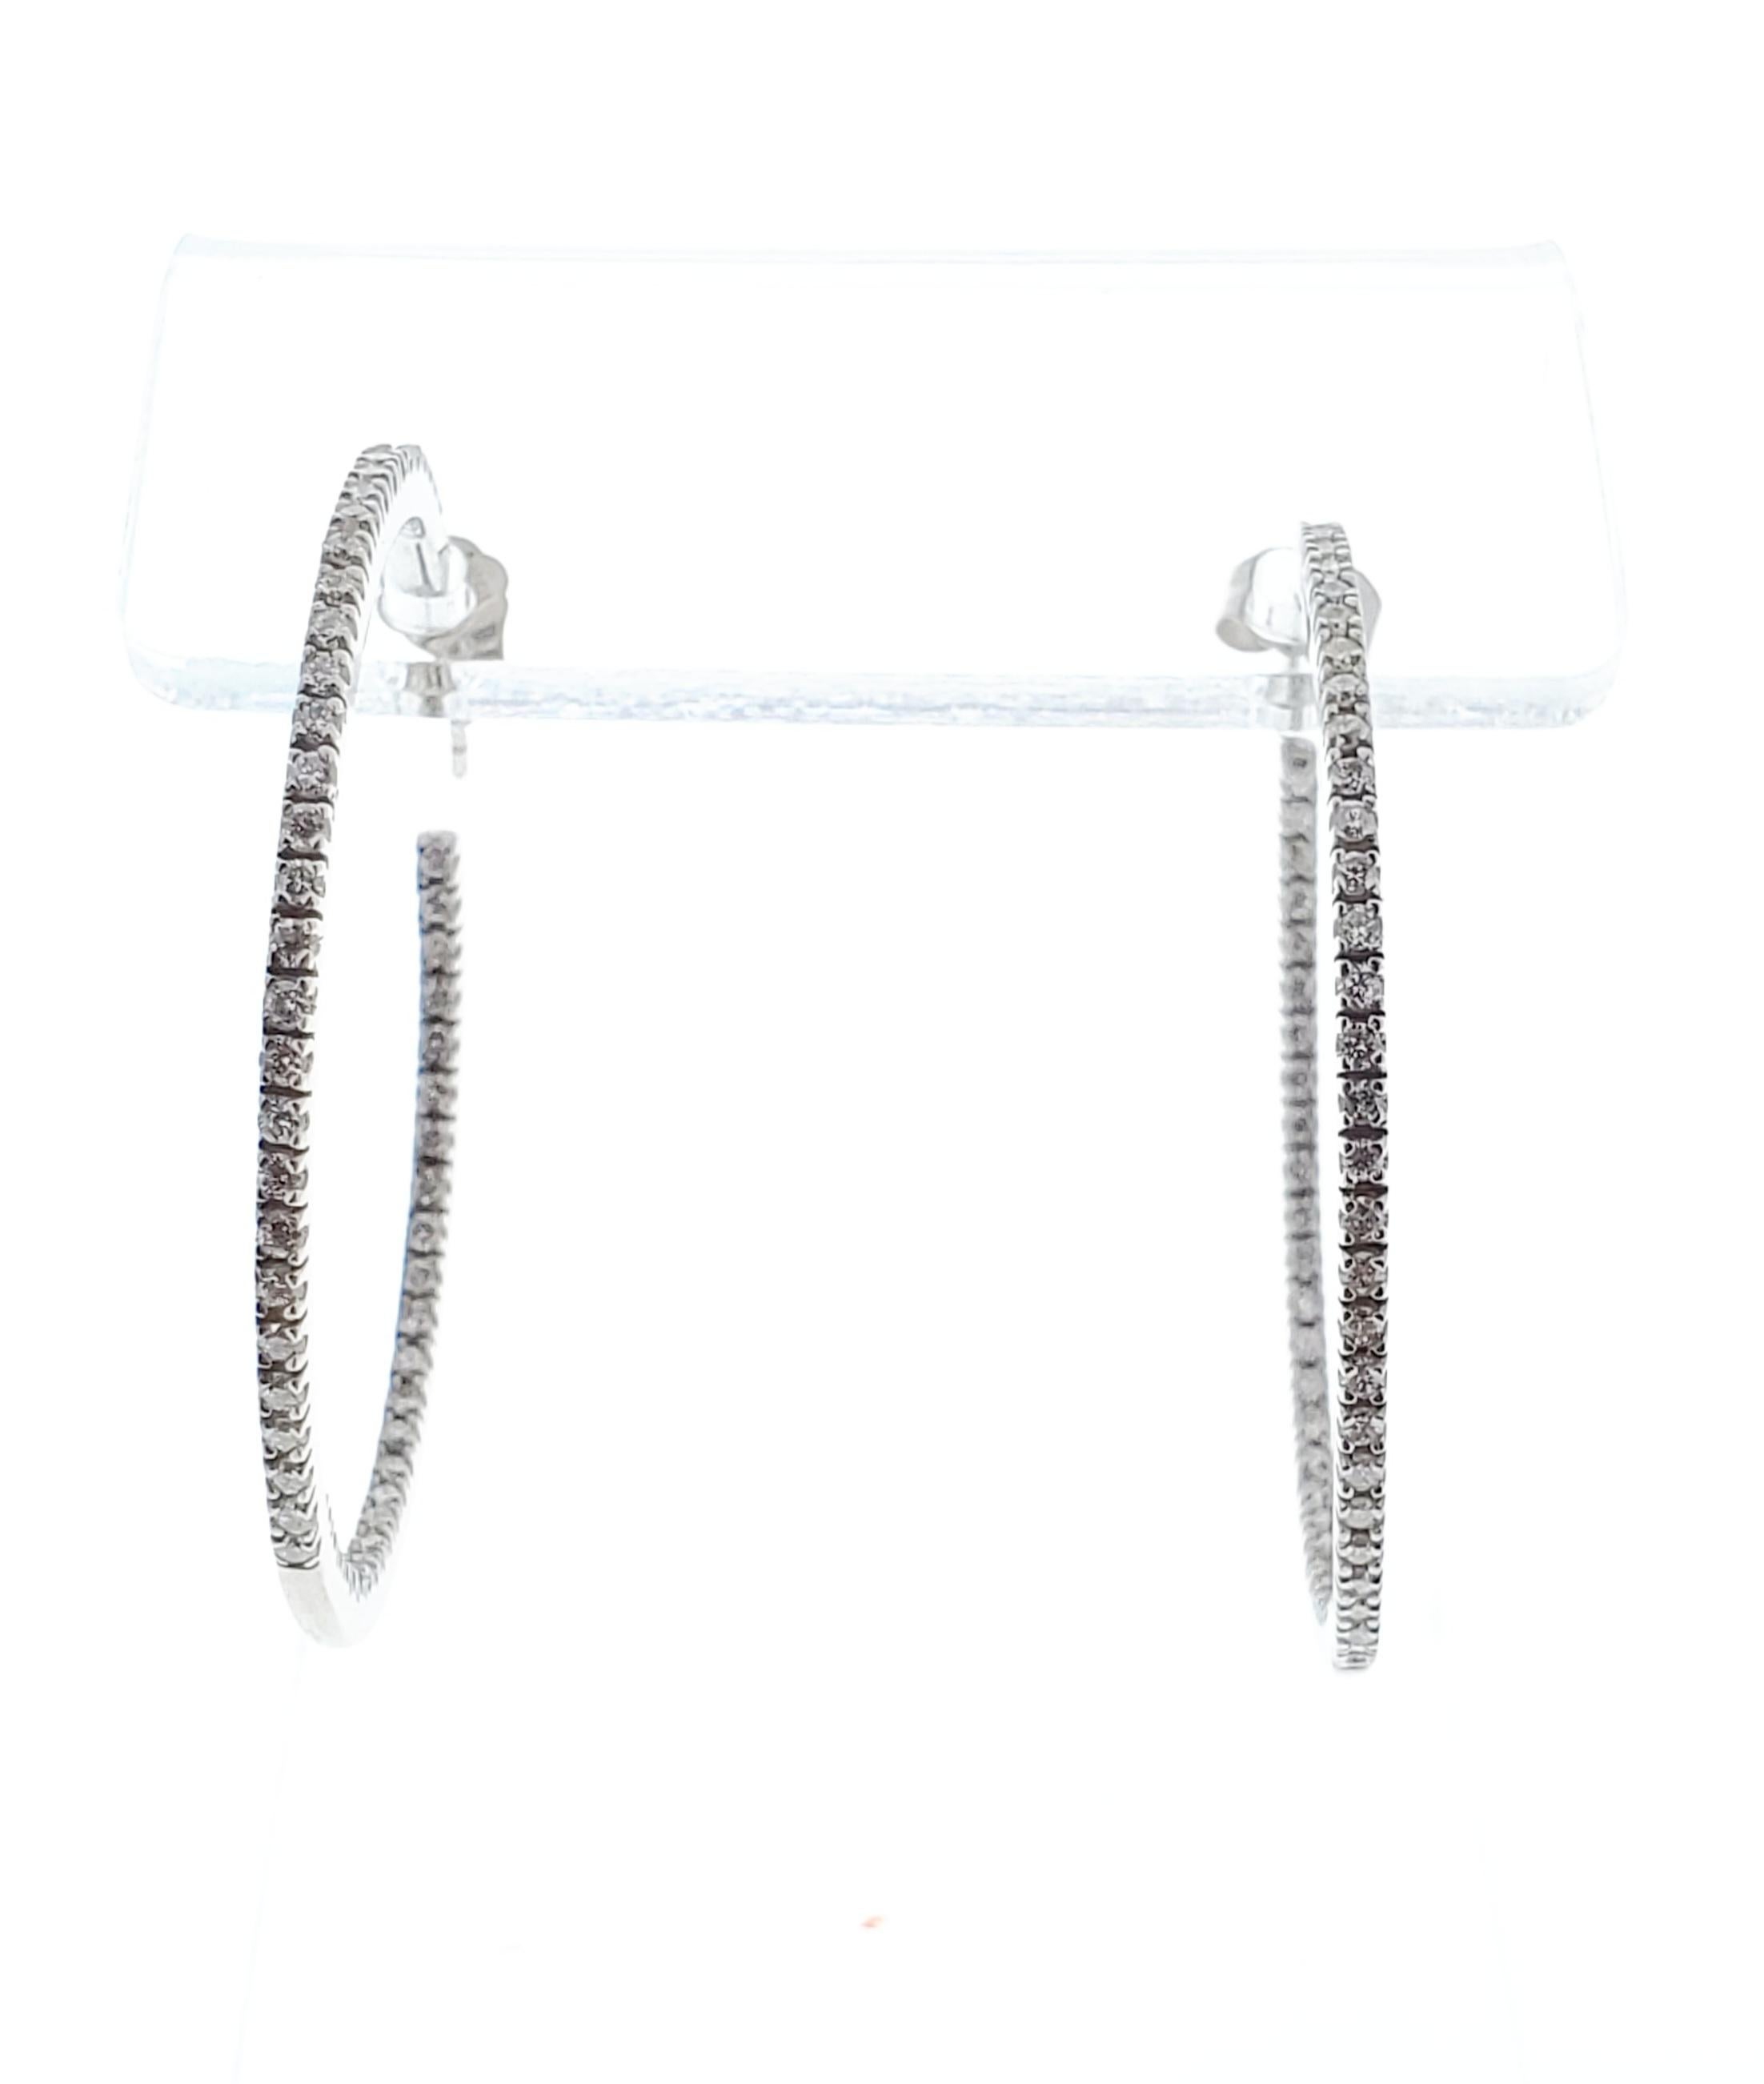 1.25 Carat White Diamond Hoop Earrings in 14 Karat White Gold In New Condition For Sale In Chicago, IL